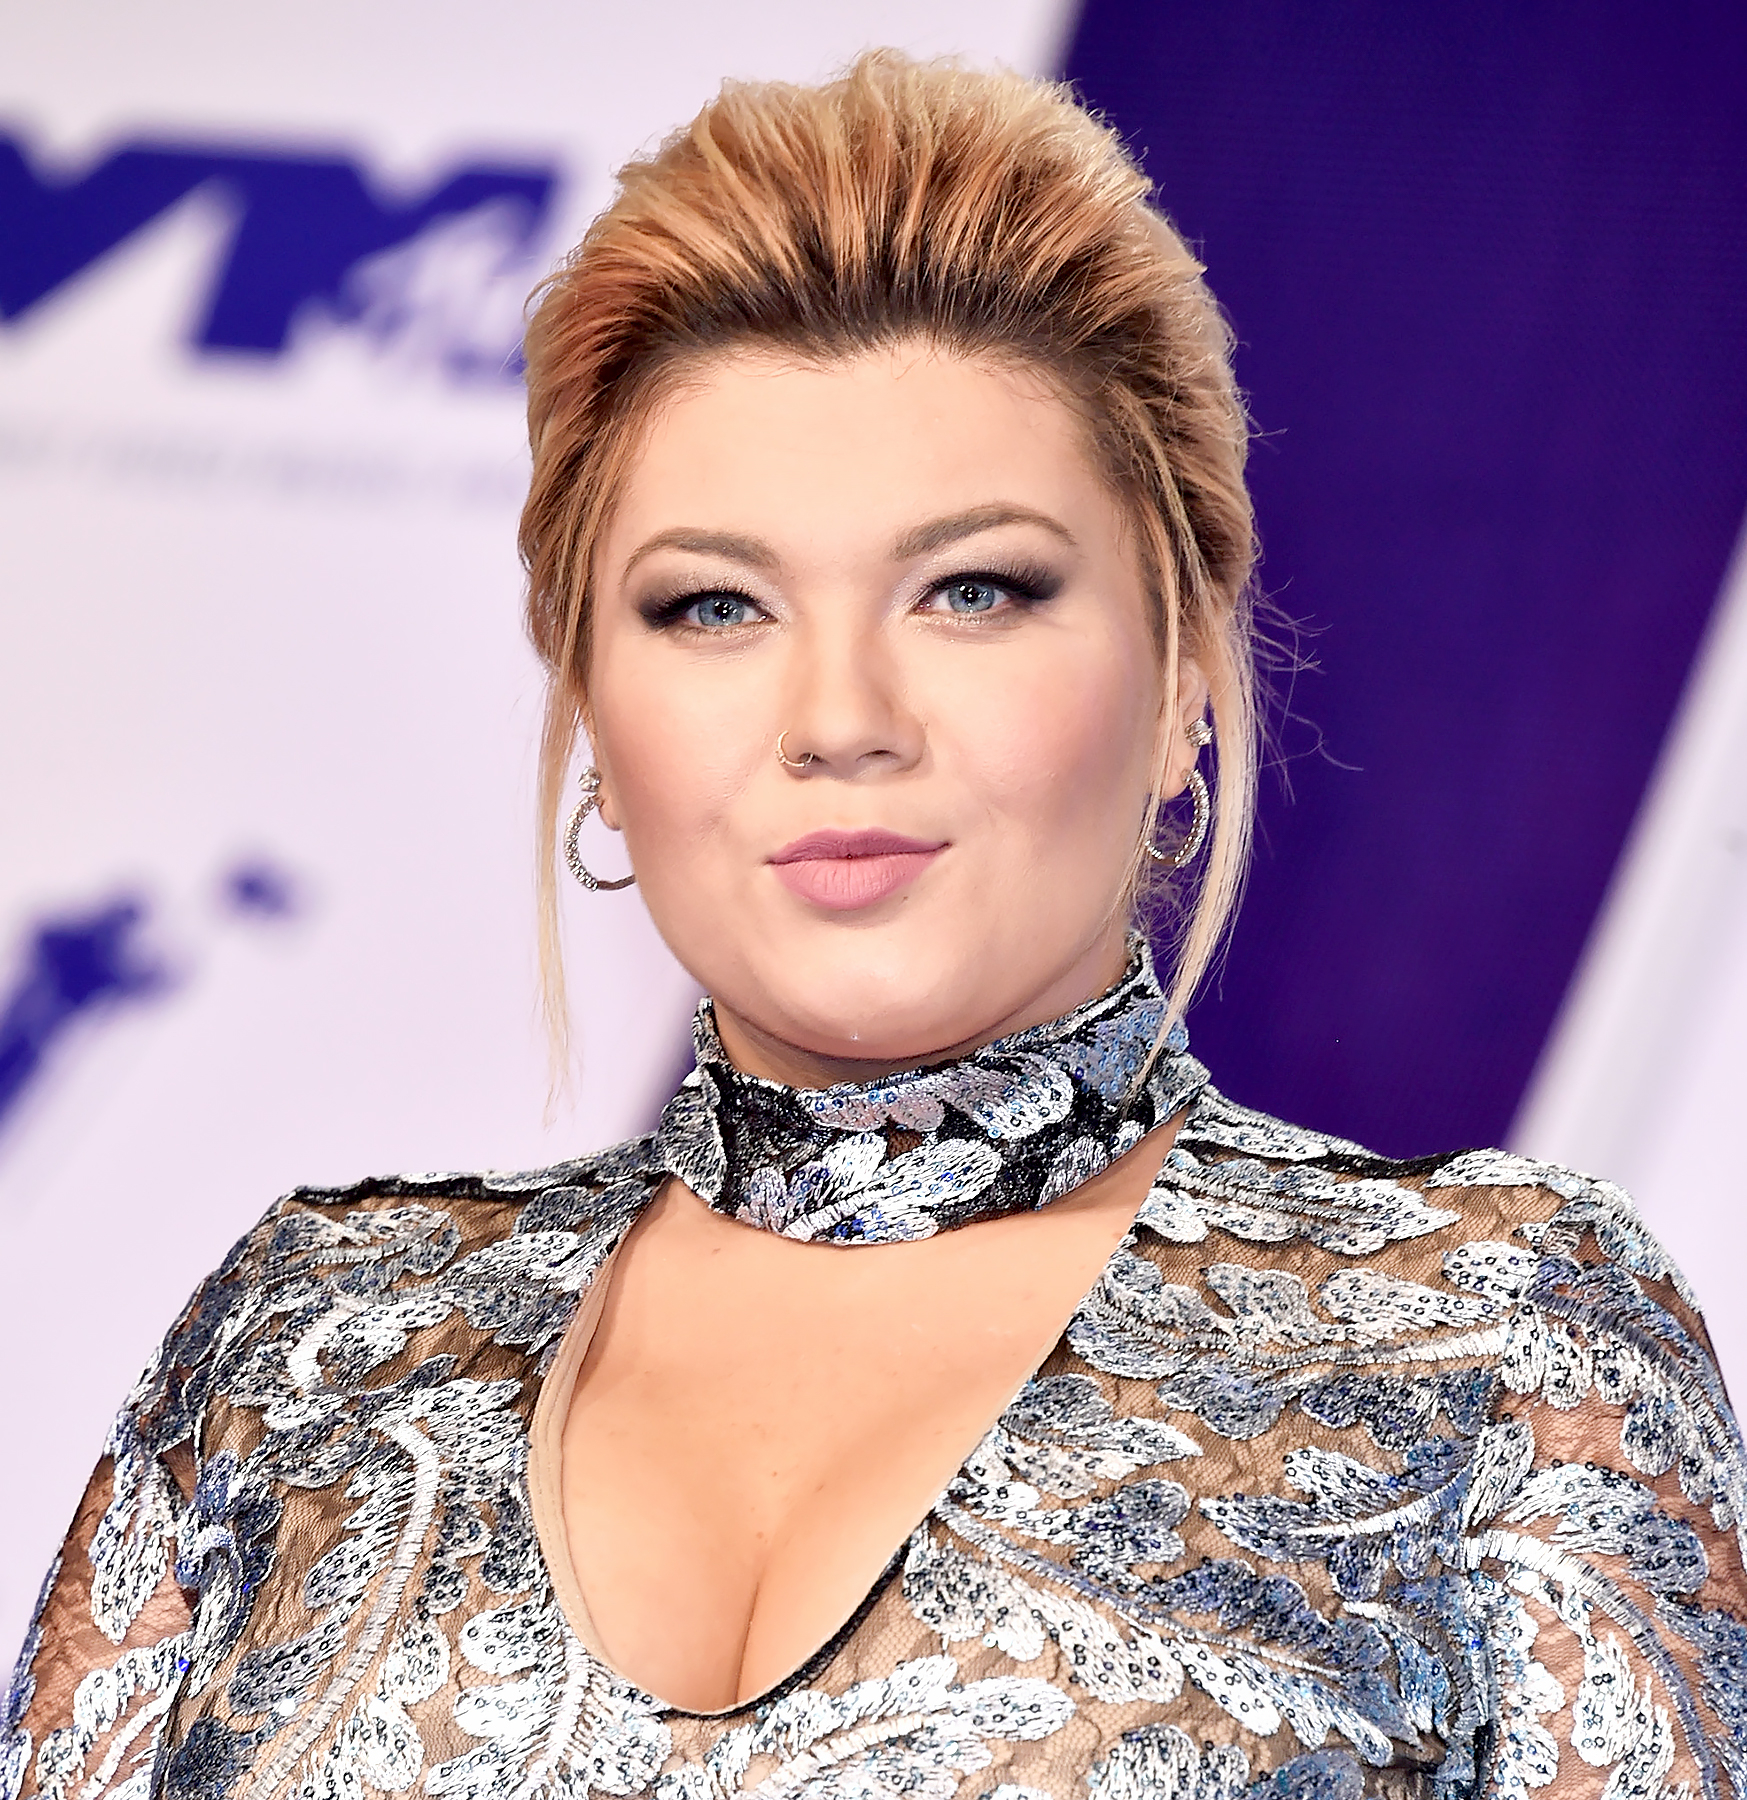 Vmas 2017 Amber Portwood Stunned In Nude Illusion Dress 